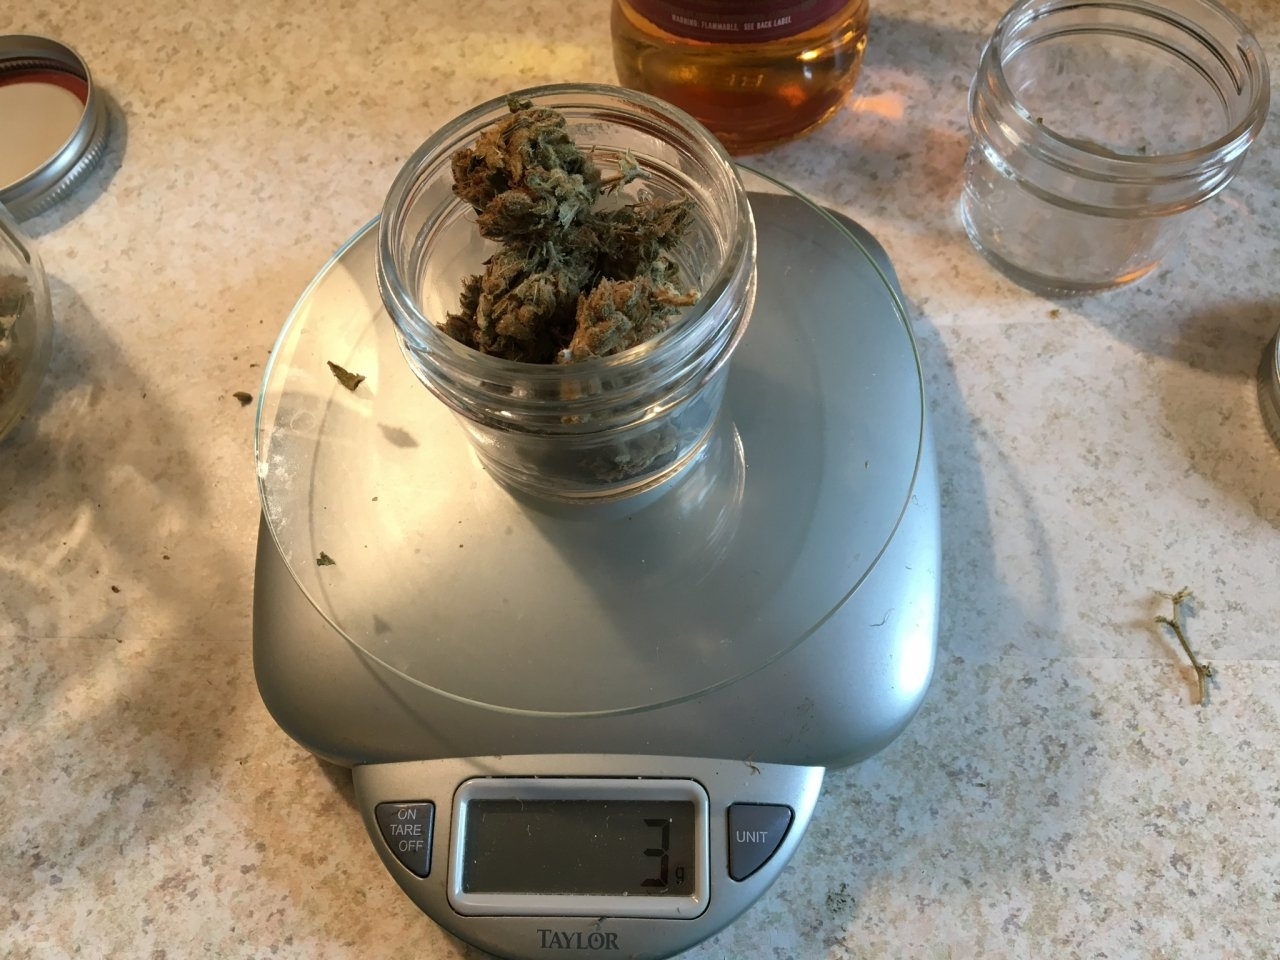 Weigh out buds